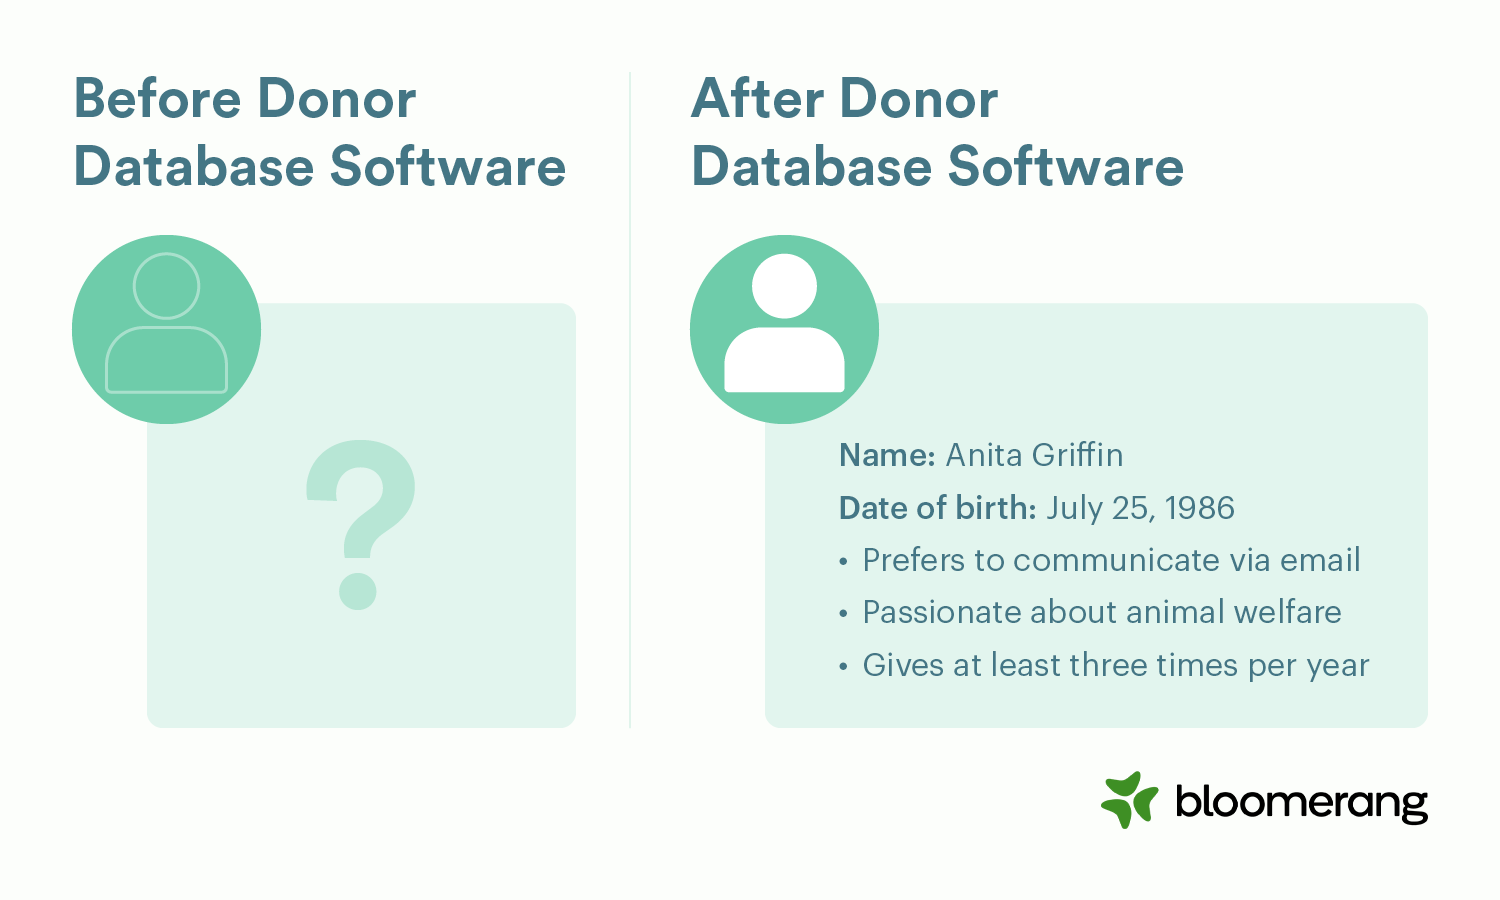 This image shows the benefits of using donor database software. Before, your donors were unknown. Using this software, you can keep track of their personal characteristics, like names, dates of birth, communication preferences, passions, and giving habits. 